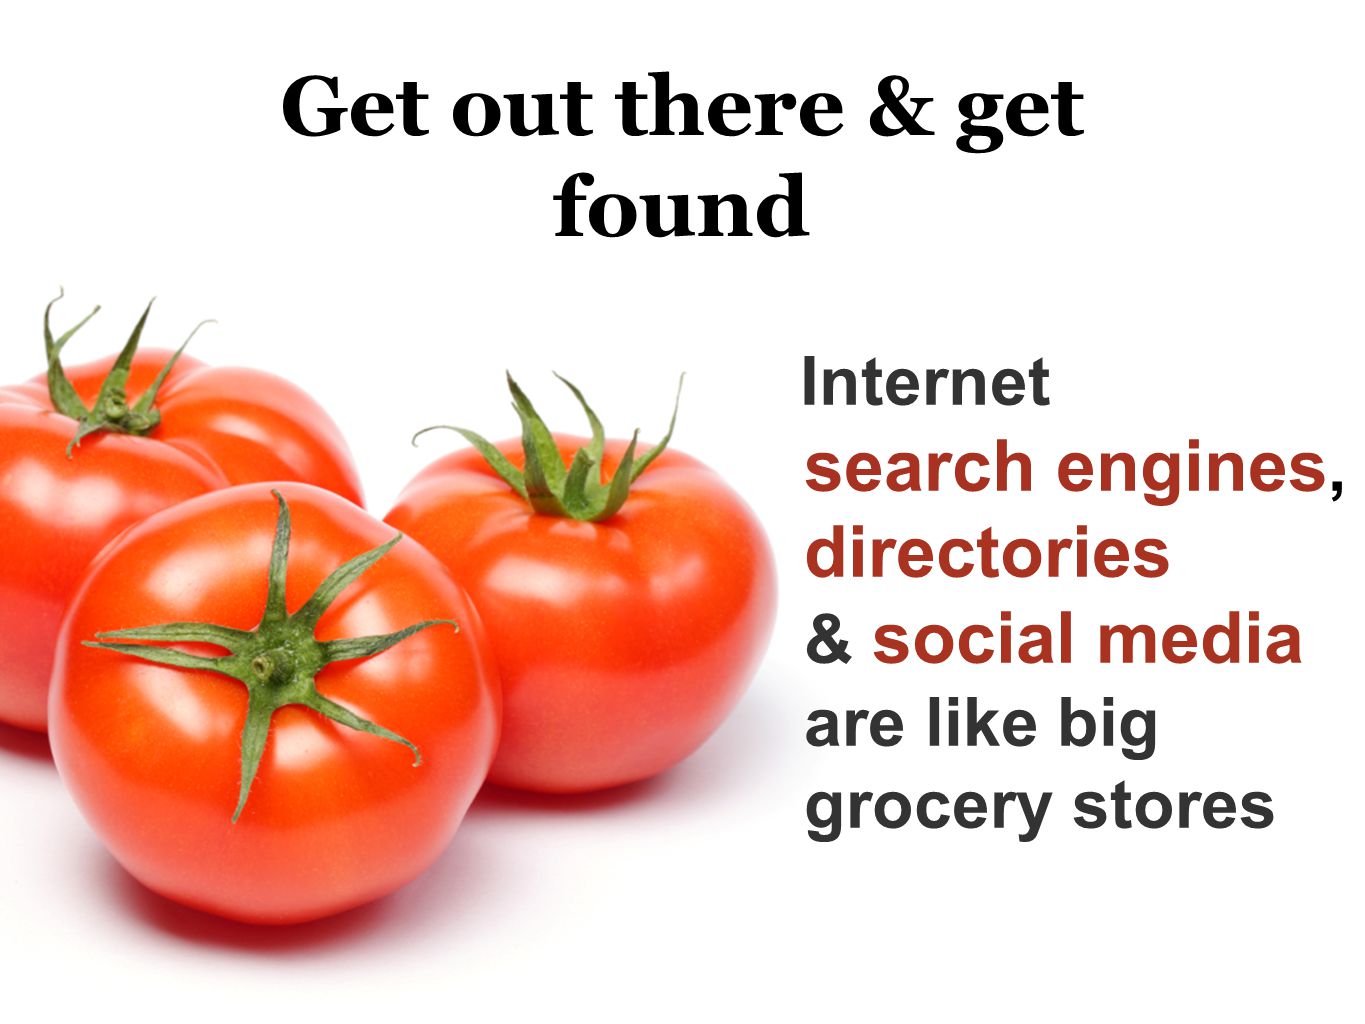 Get out there & get found Internet search engines, directories & social media are like big grocery stores